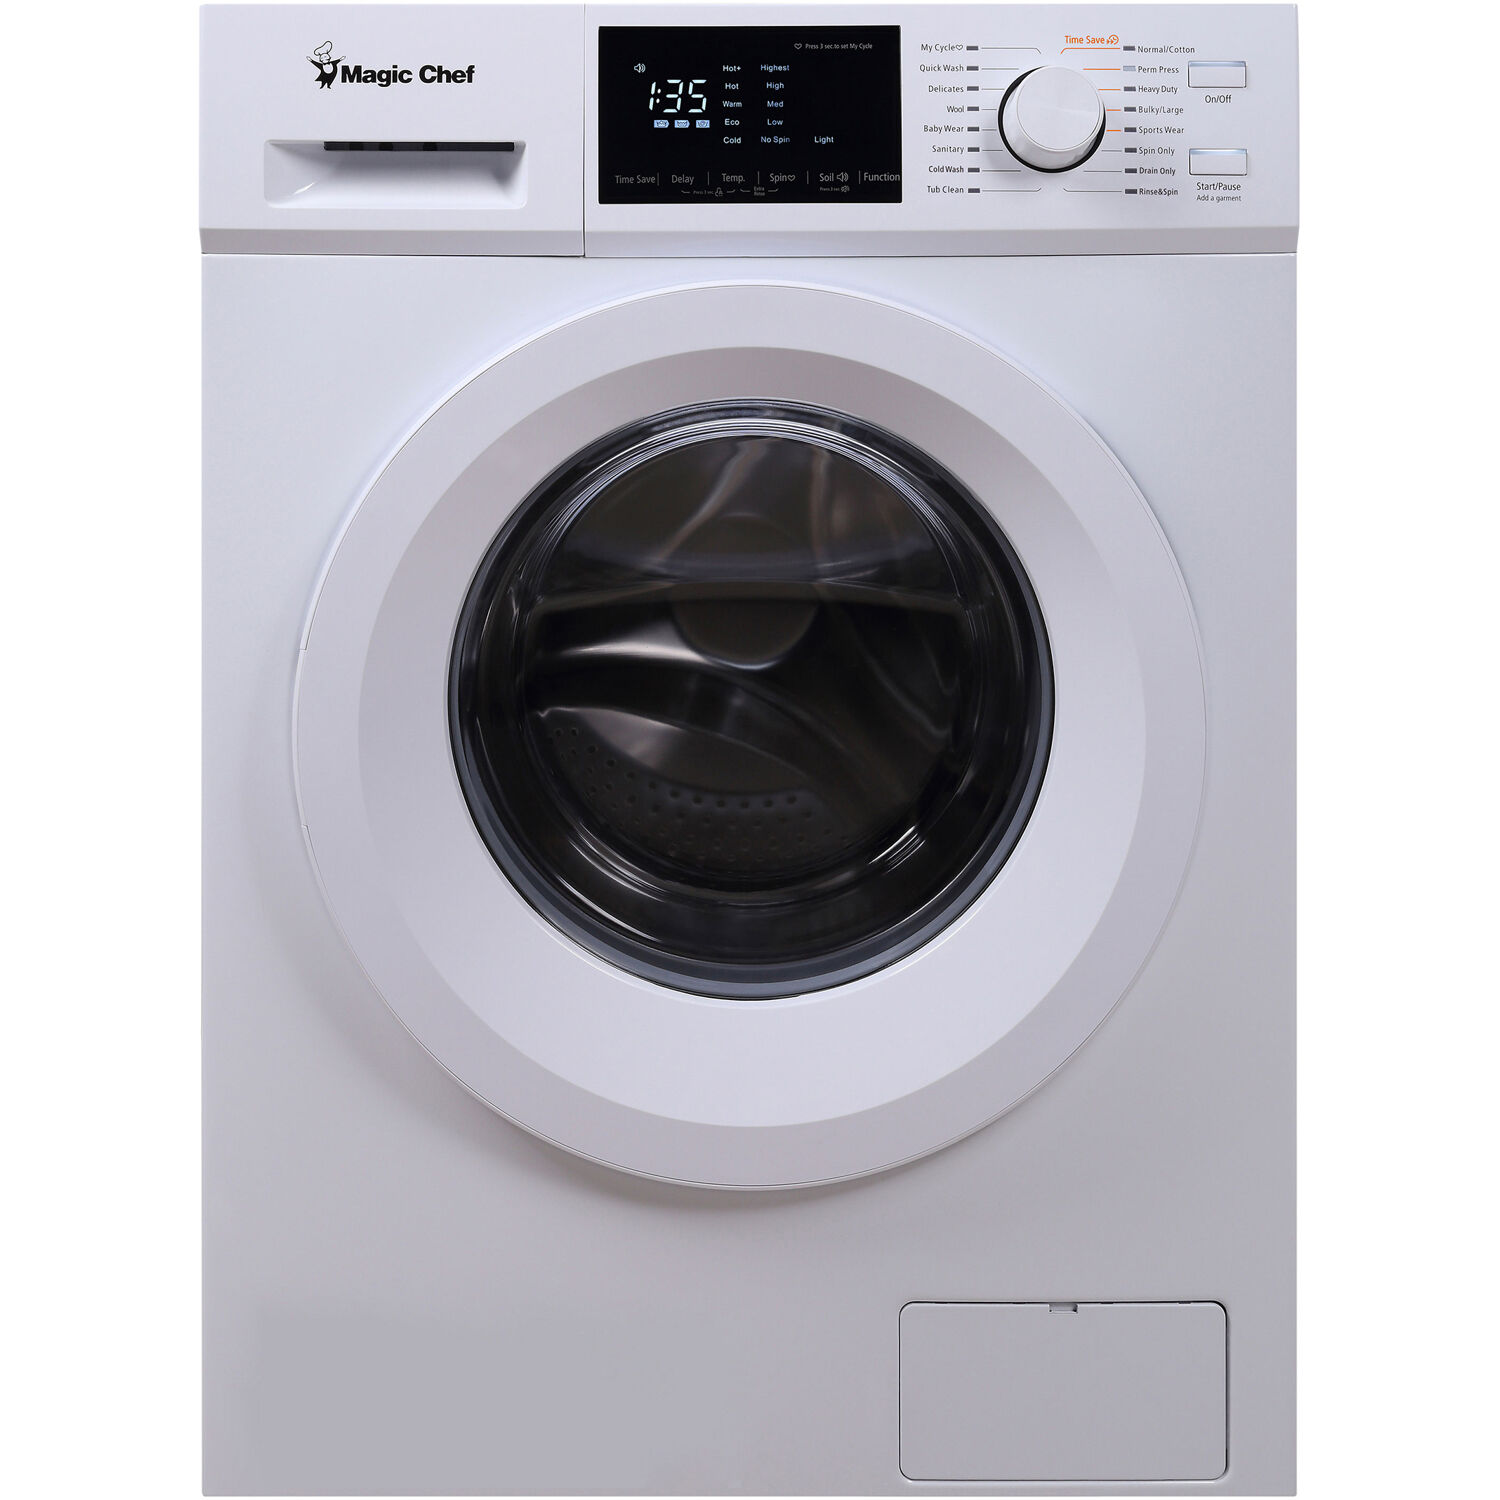 Magic Chef Brand 24 in. 2.7 Cu. ft. Front Load Washer in White MCSFLW27W, 23.4 in L x 33.5 in H x 23.4 in D, 160.9 lbs. - image 1 of 8